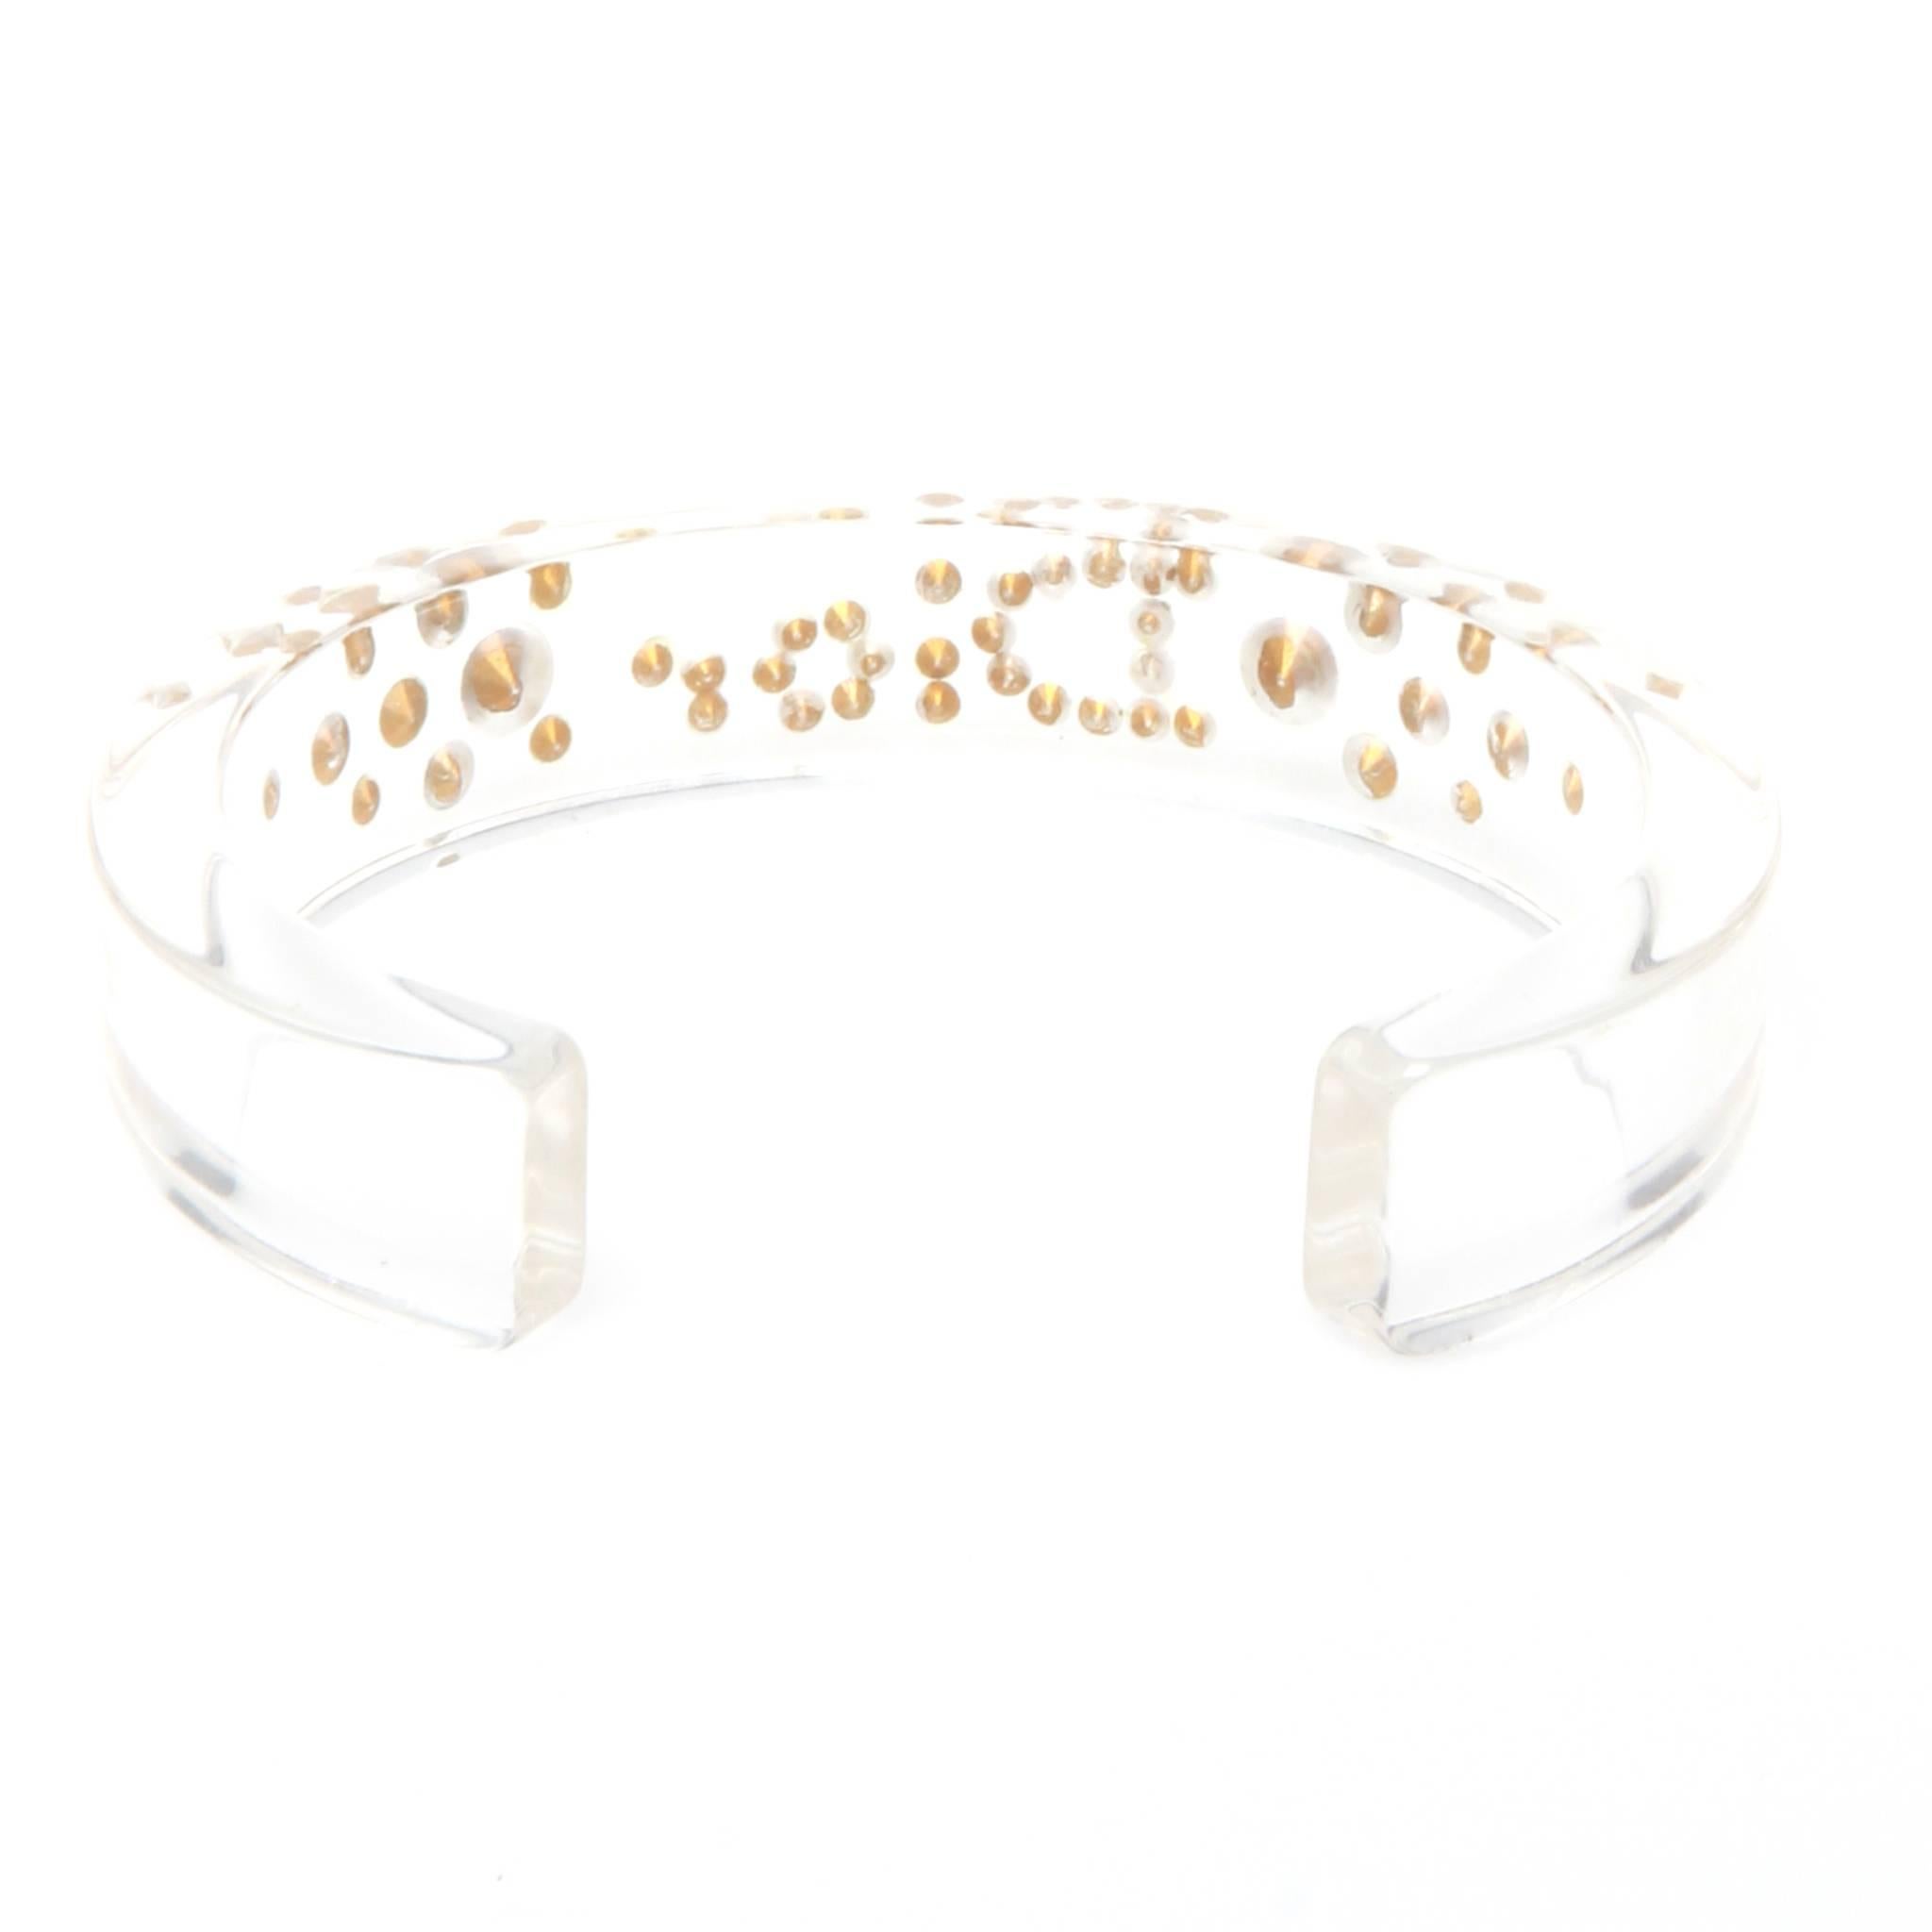 Christian Dior lucite clear perspex cuff with clear Swarovski crystals throughout. 